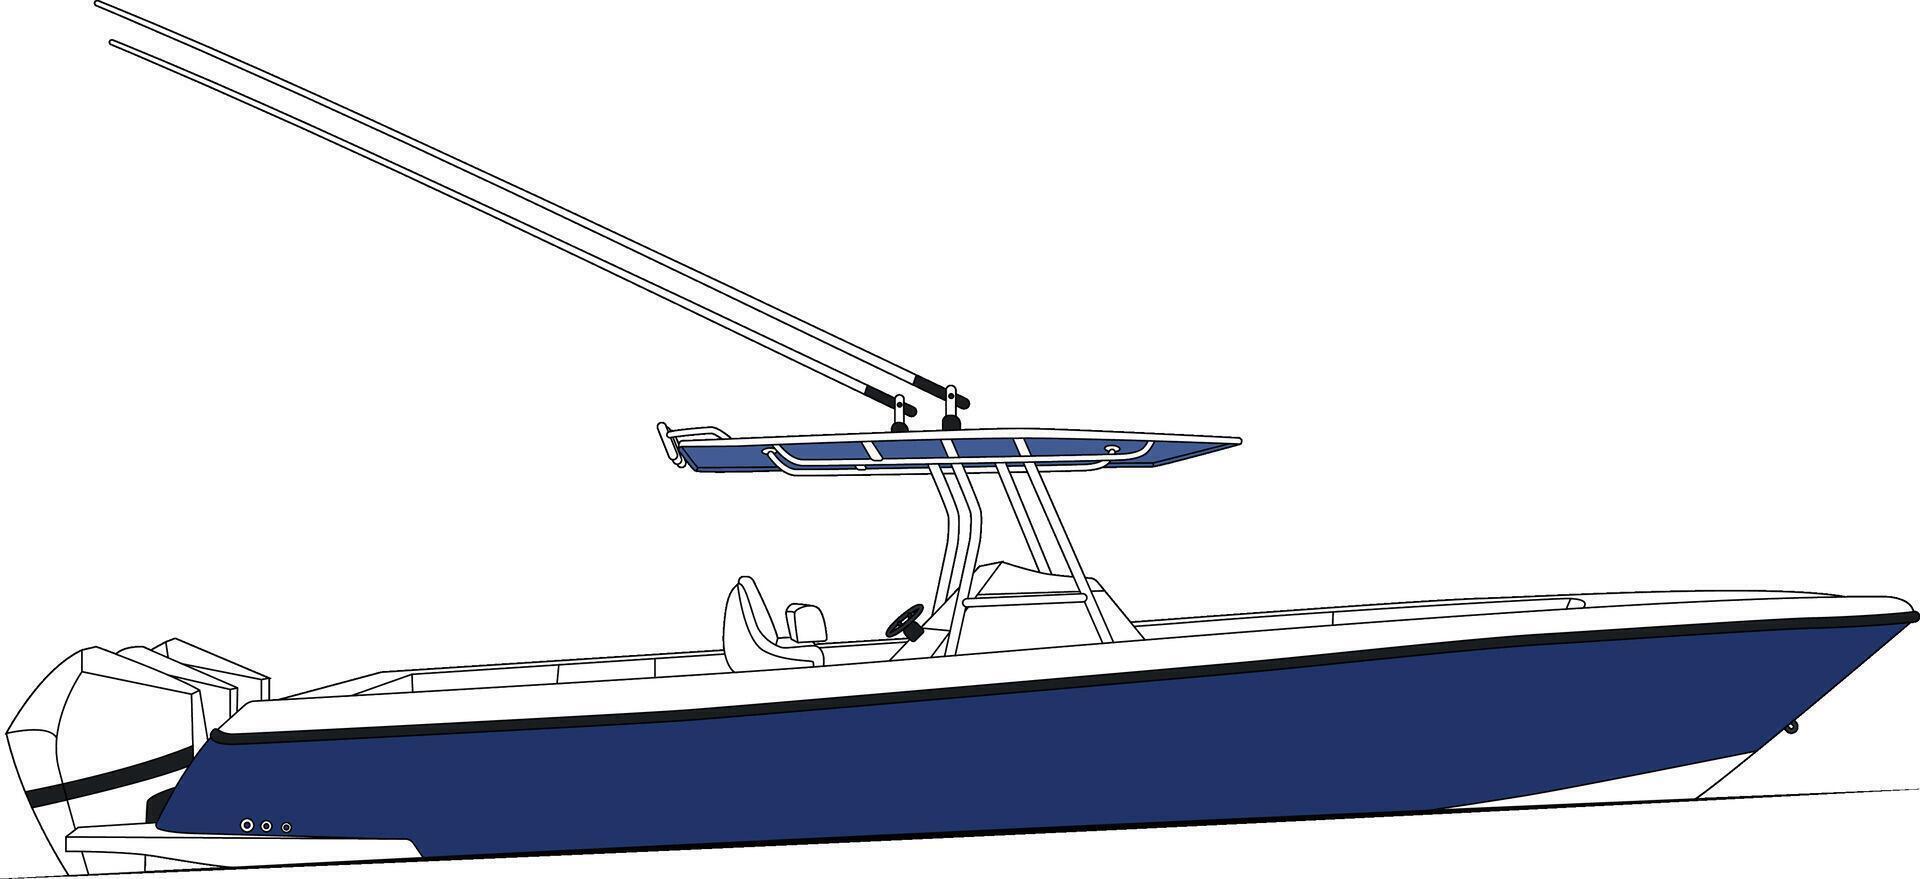 Side view fishing boat vector